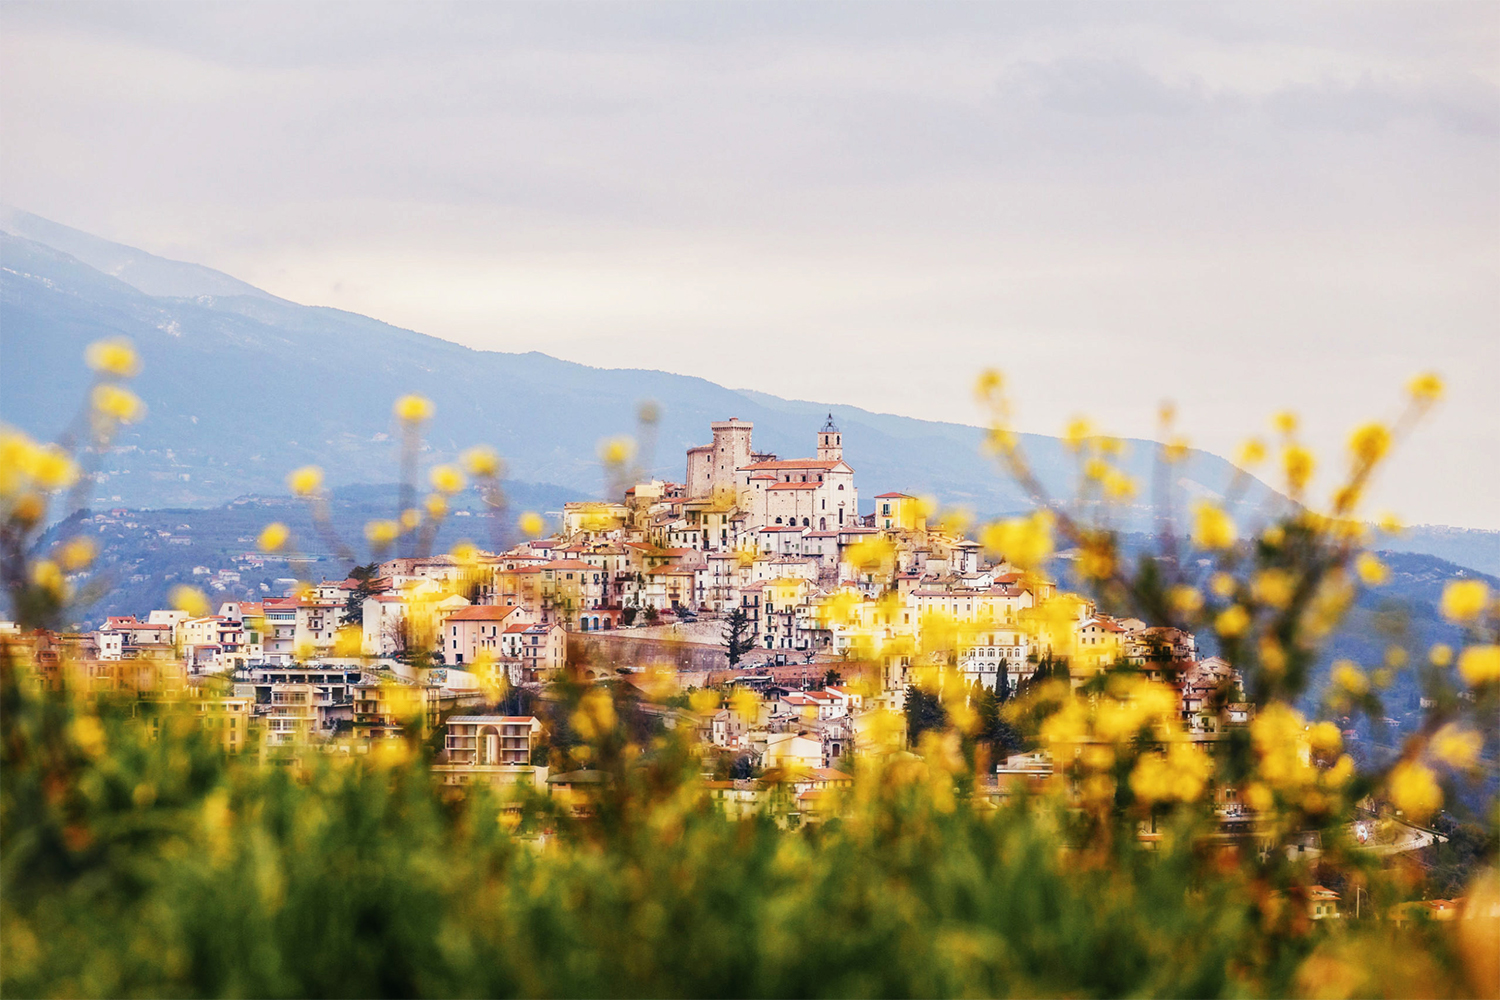 The town of Casoli, Italy, as seen from far away behind yellow flowers